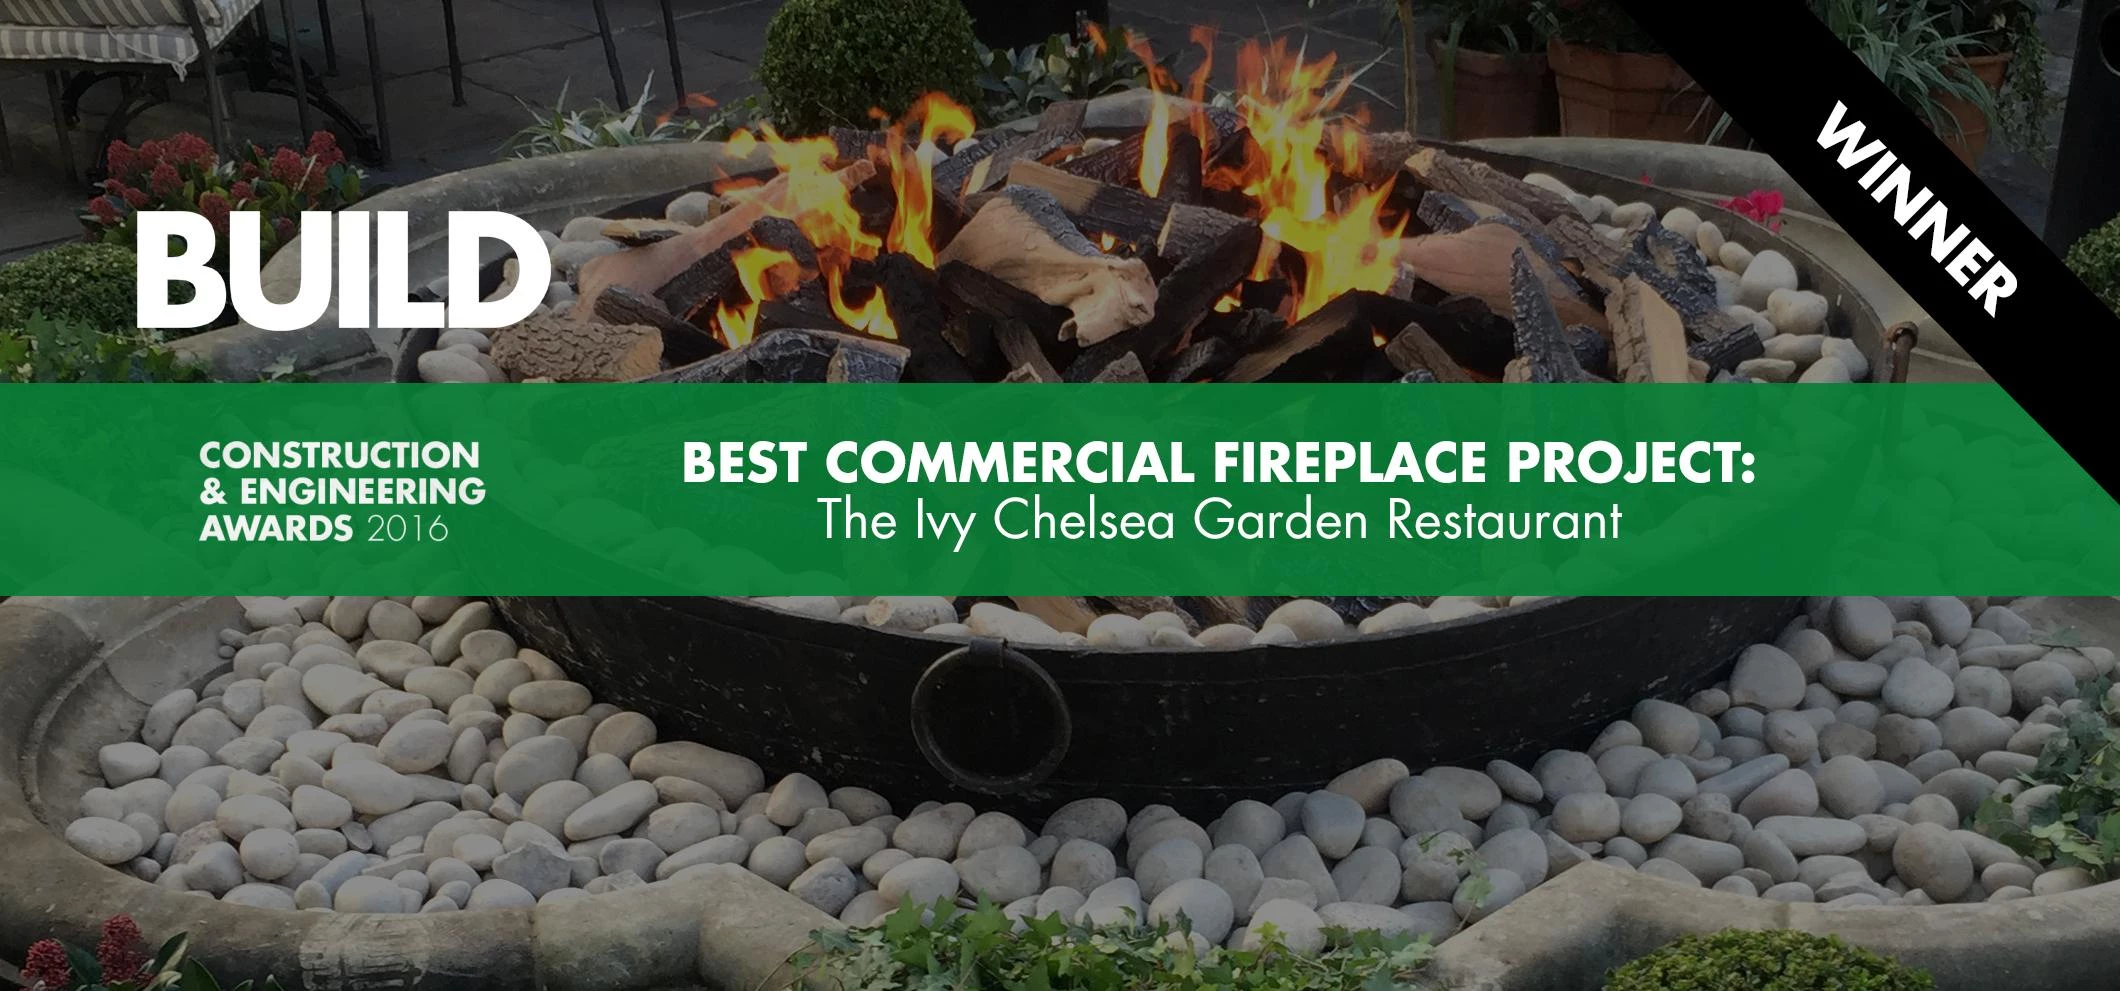 Real Flame's design at Ivy Garden garnered Best Commercial Fireplace Project